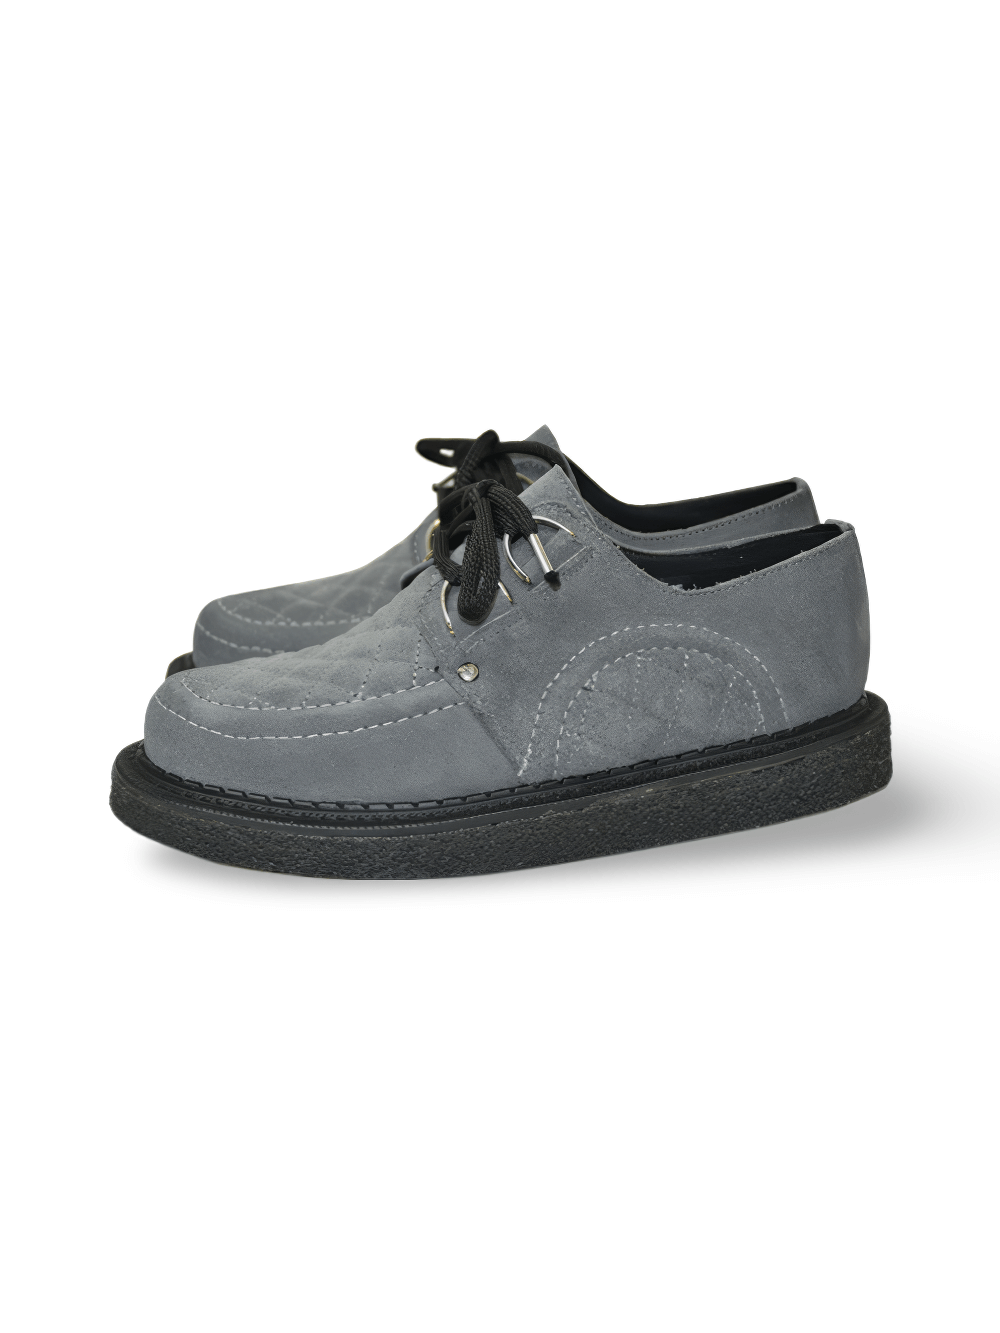 Unisex Gray Suede Lace-Up Creepers in Rockabilly Style